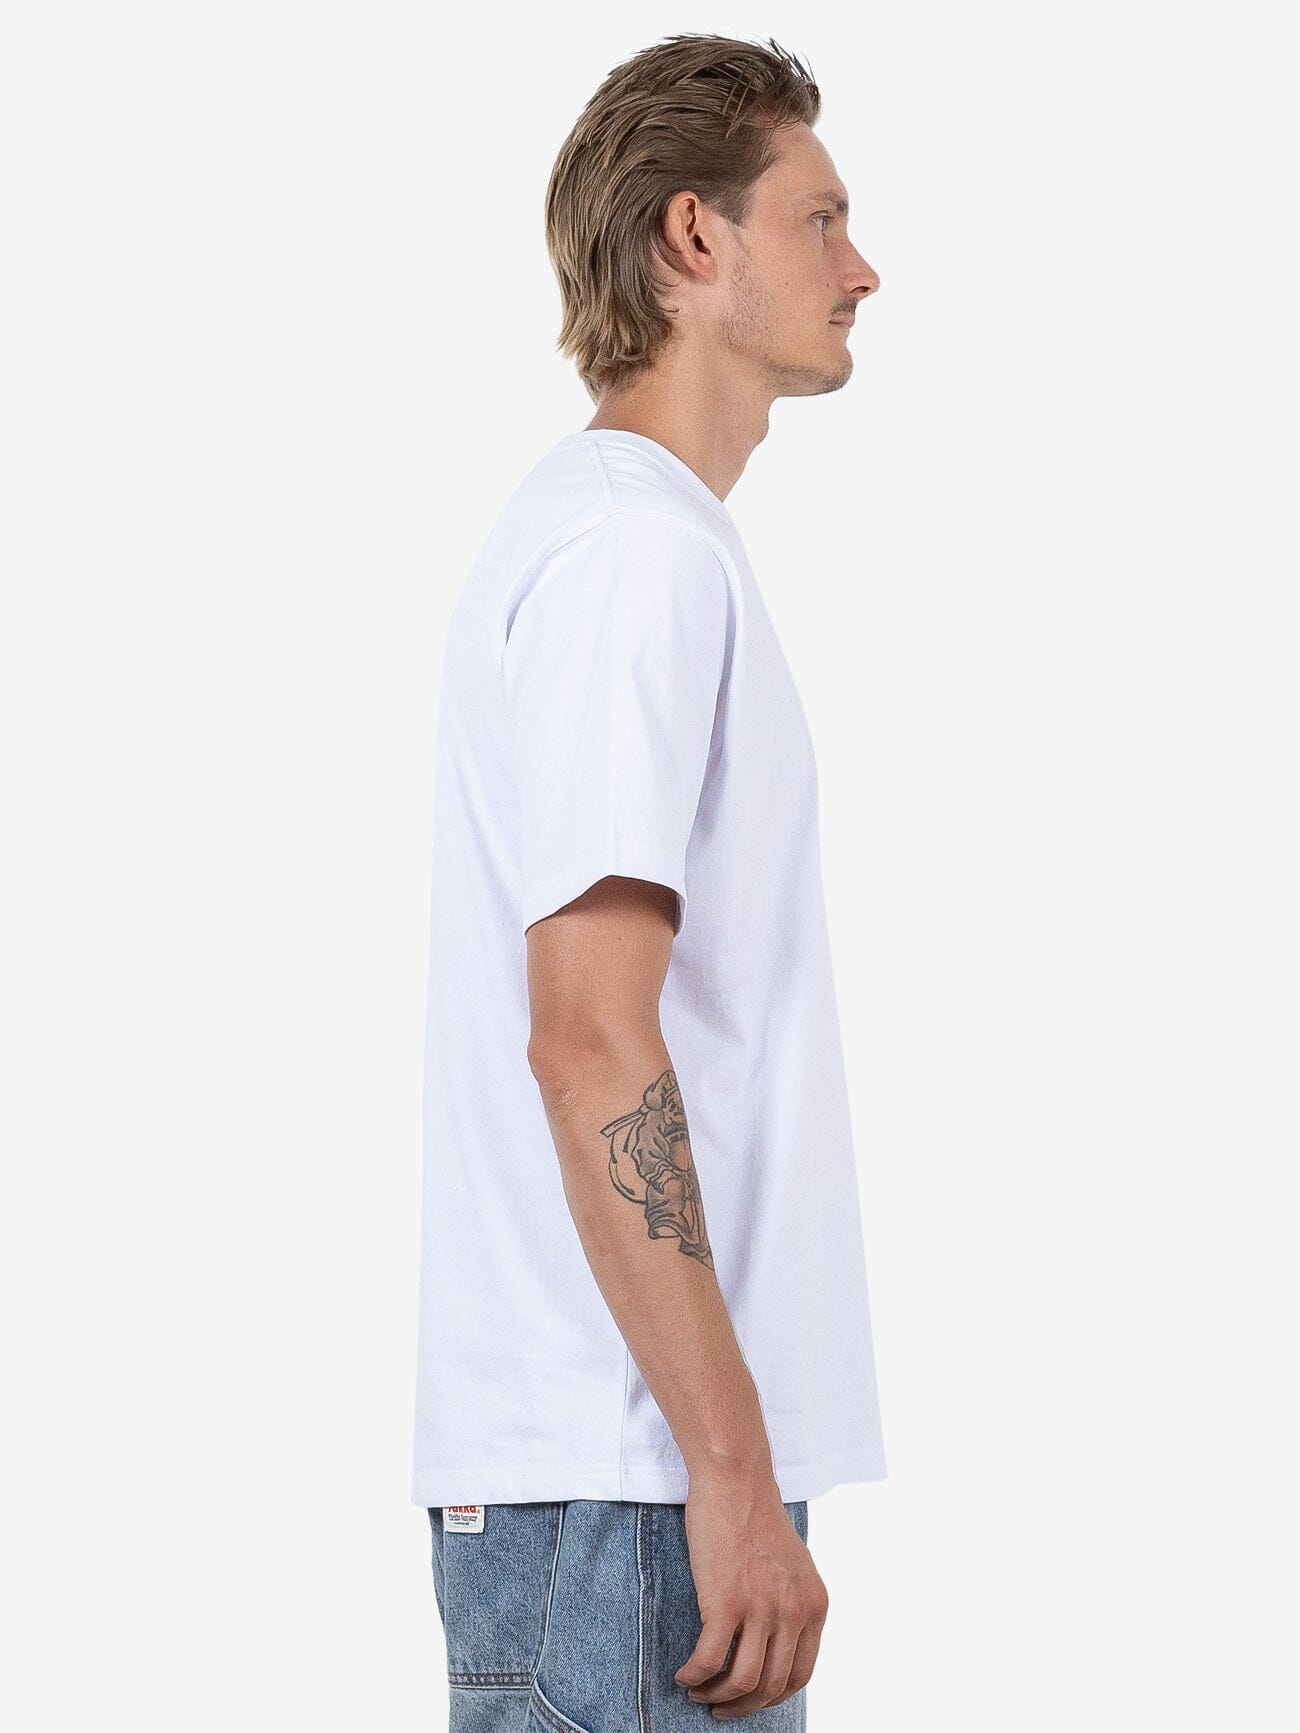 HYC Workmate Oversize Fit Tee - White